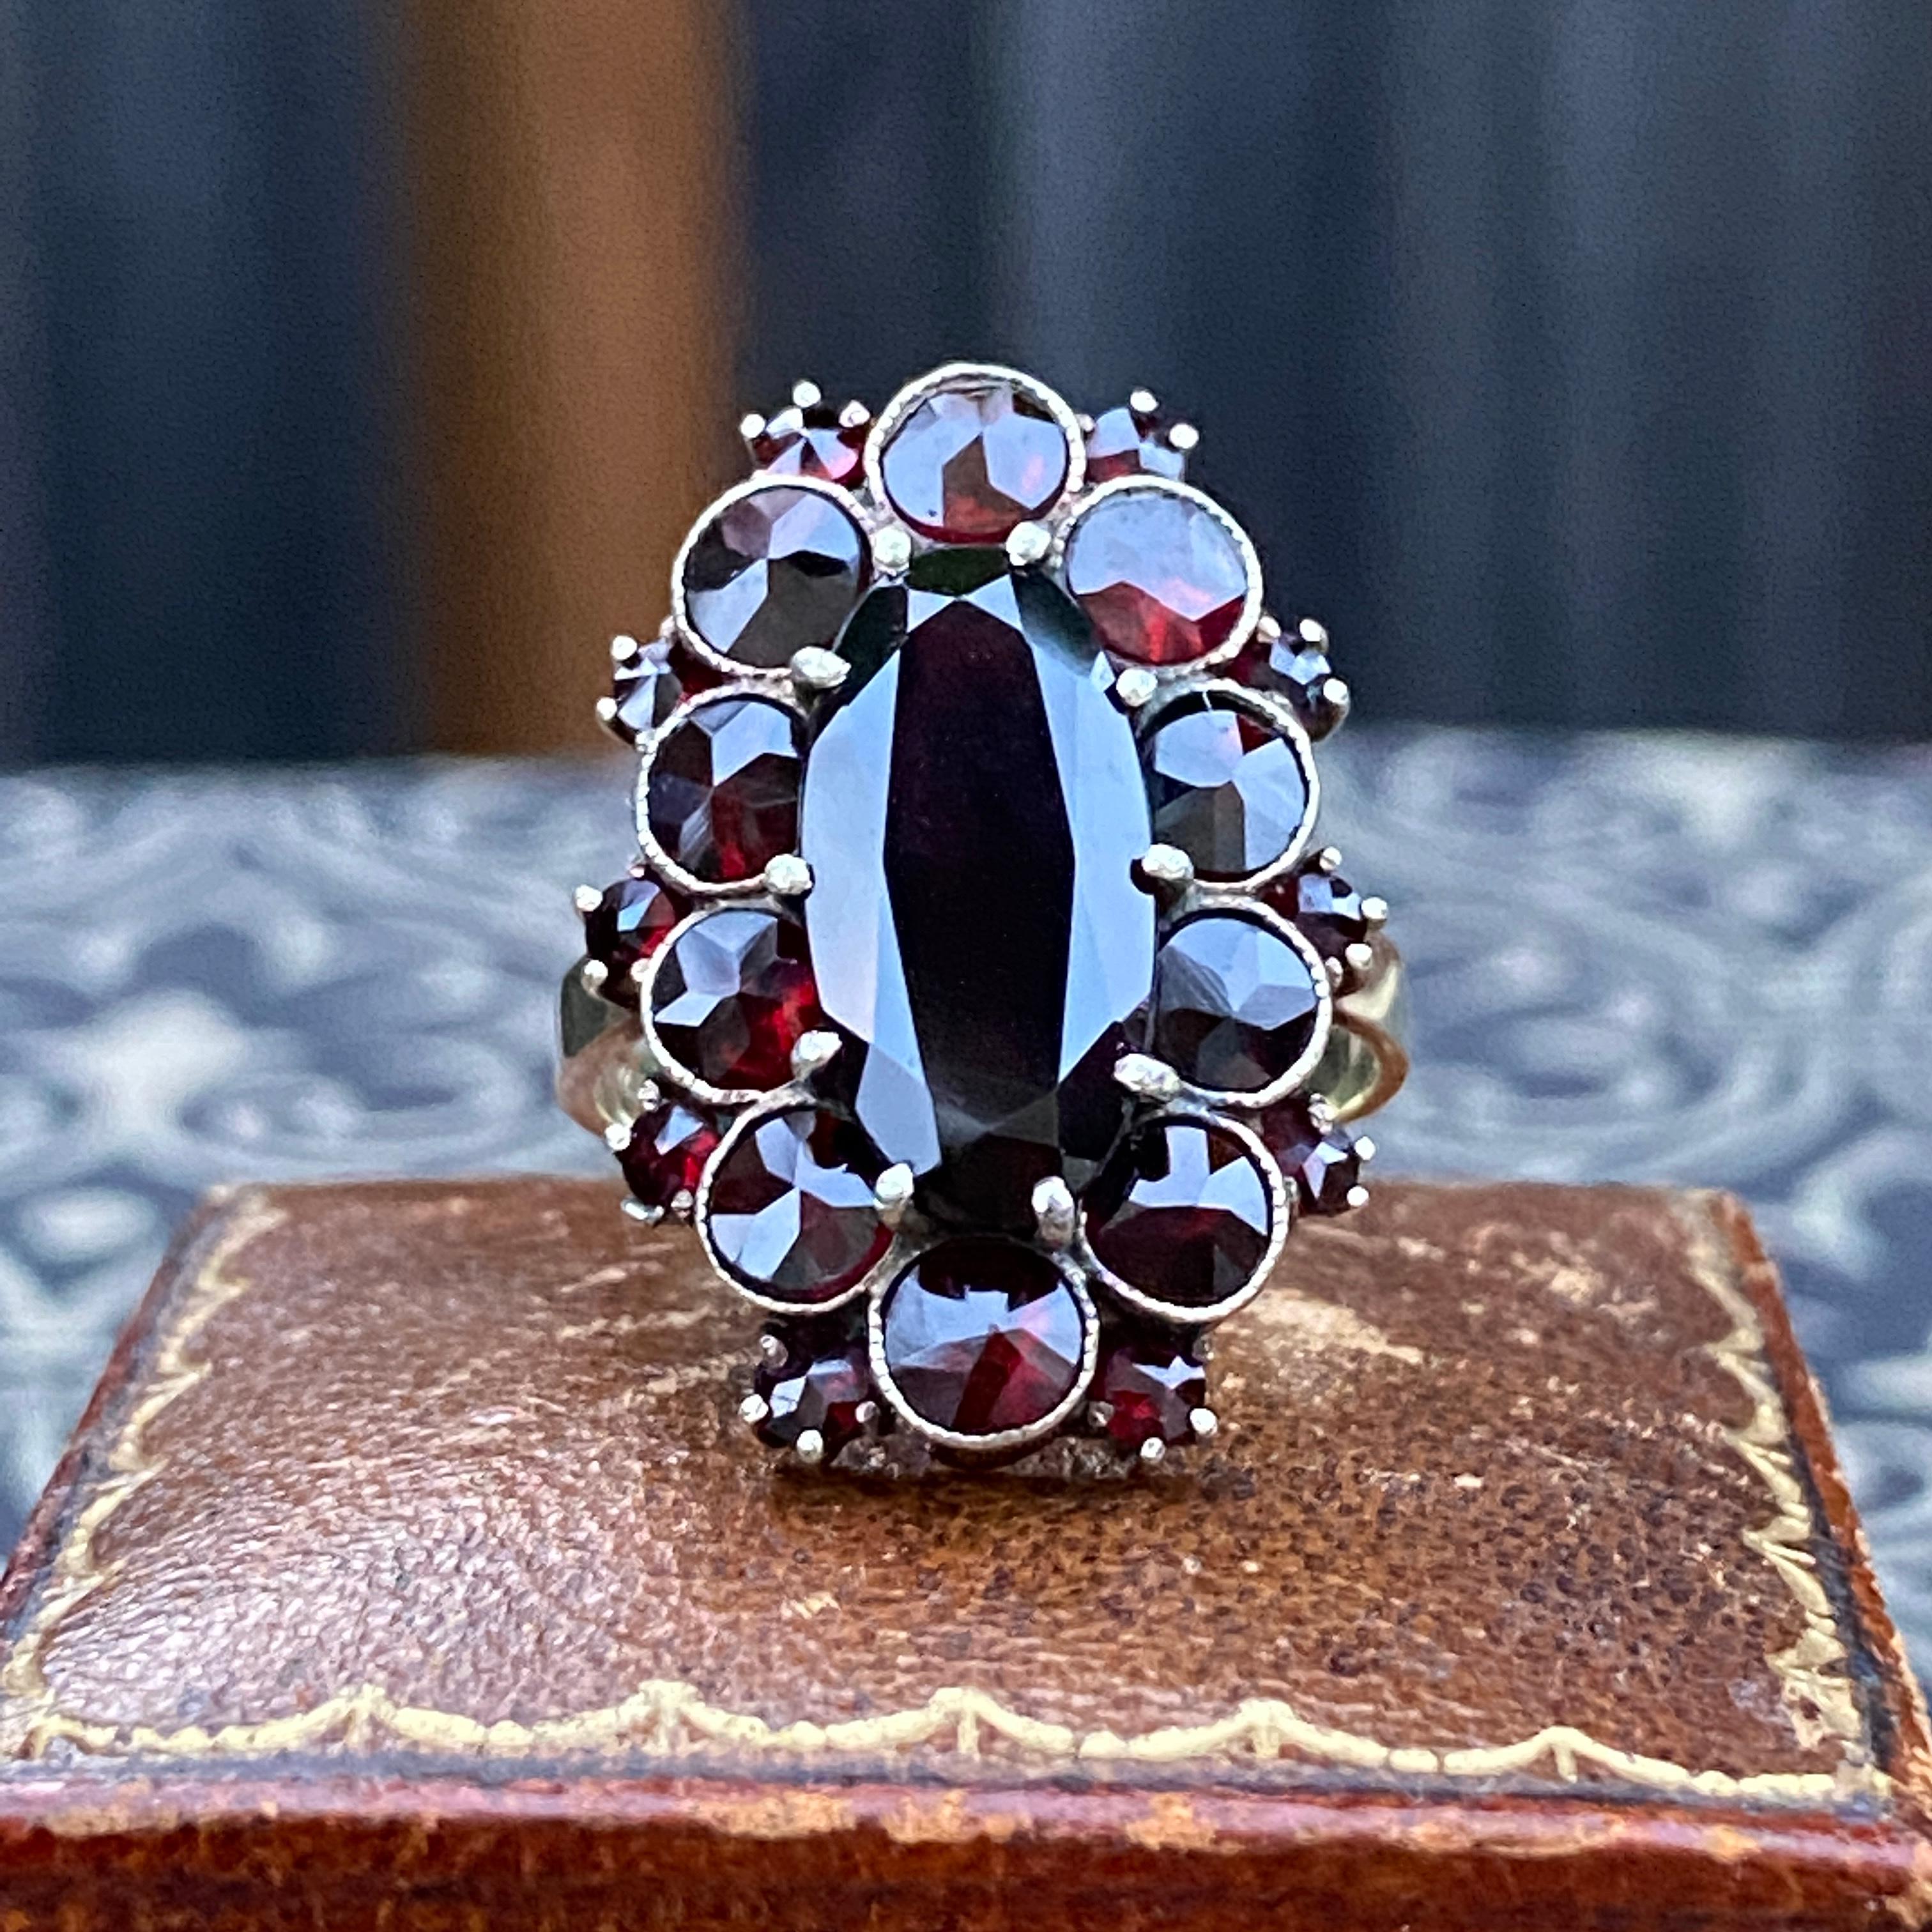 Details: 
Beautiful vintage Bohemian garnet cocktail ring Vermeil silver and 14K gold. The ring has 21 garnets, the large oval center garnet measures 15 x 7.3mm, next there are 10 round garnets measuring 4mm, and 10 additional small garnets